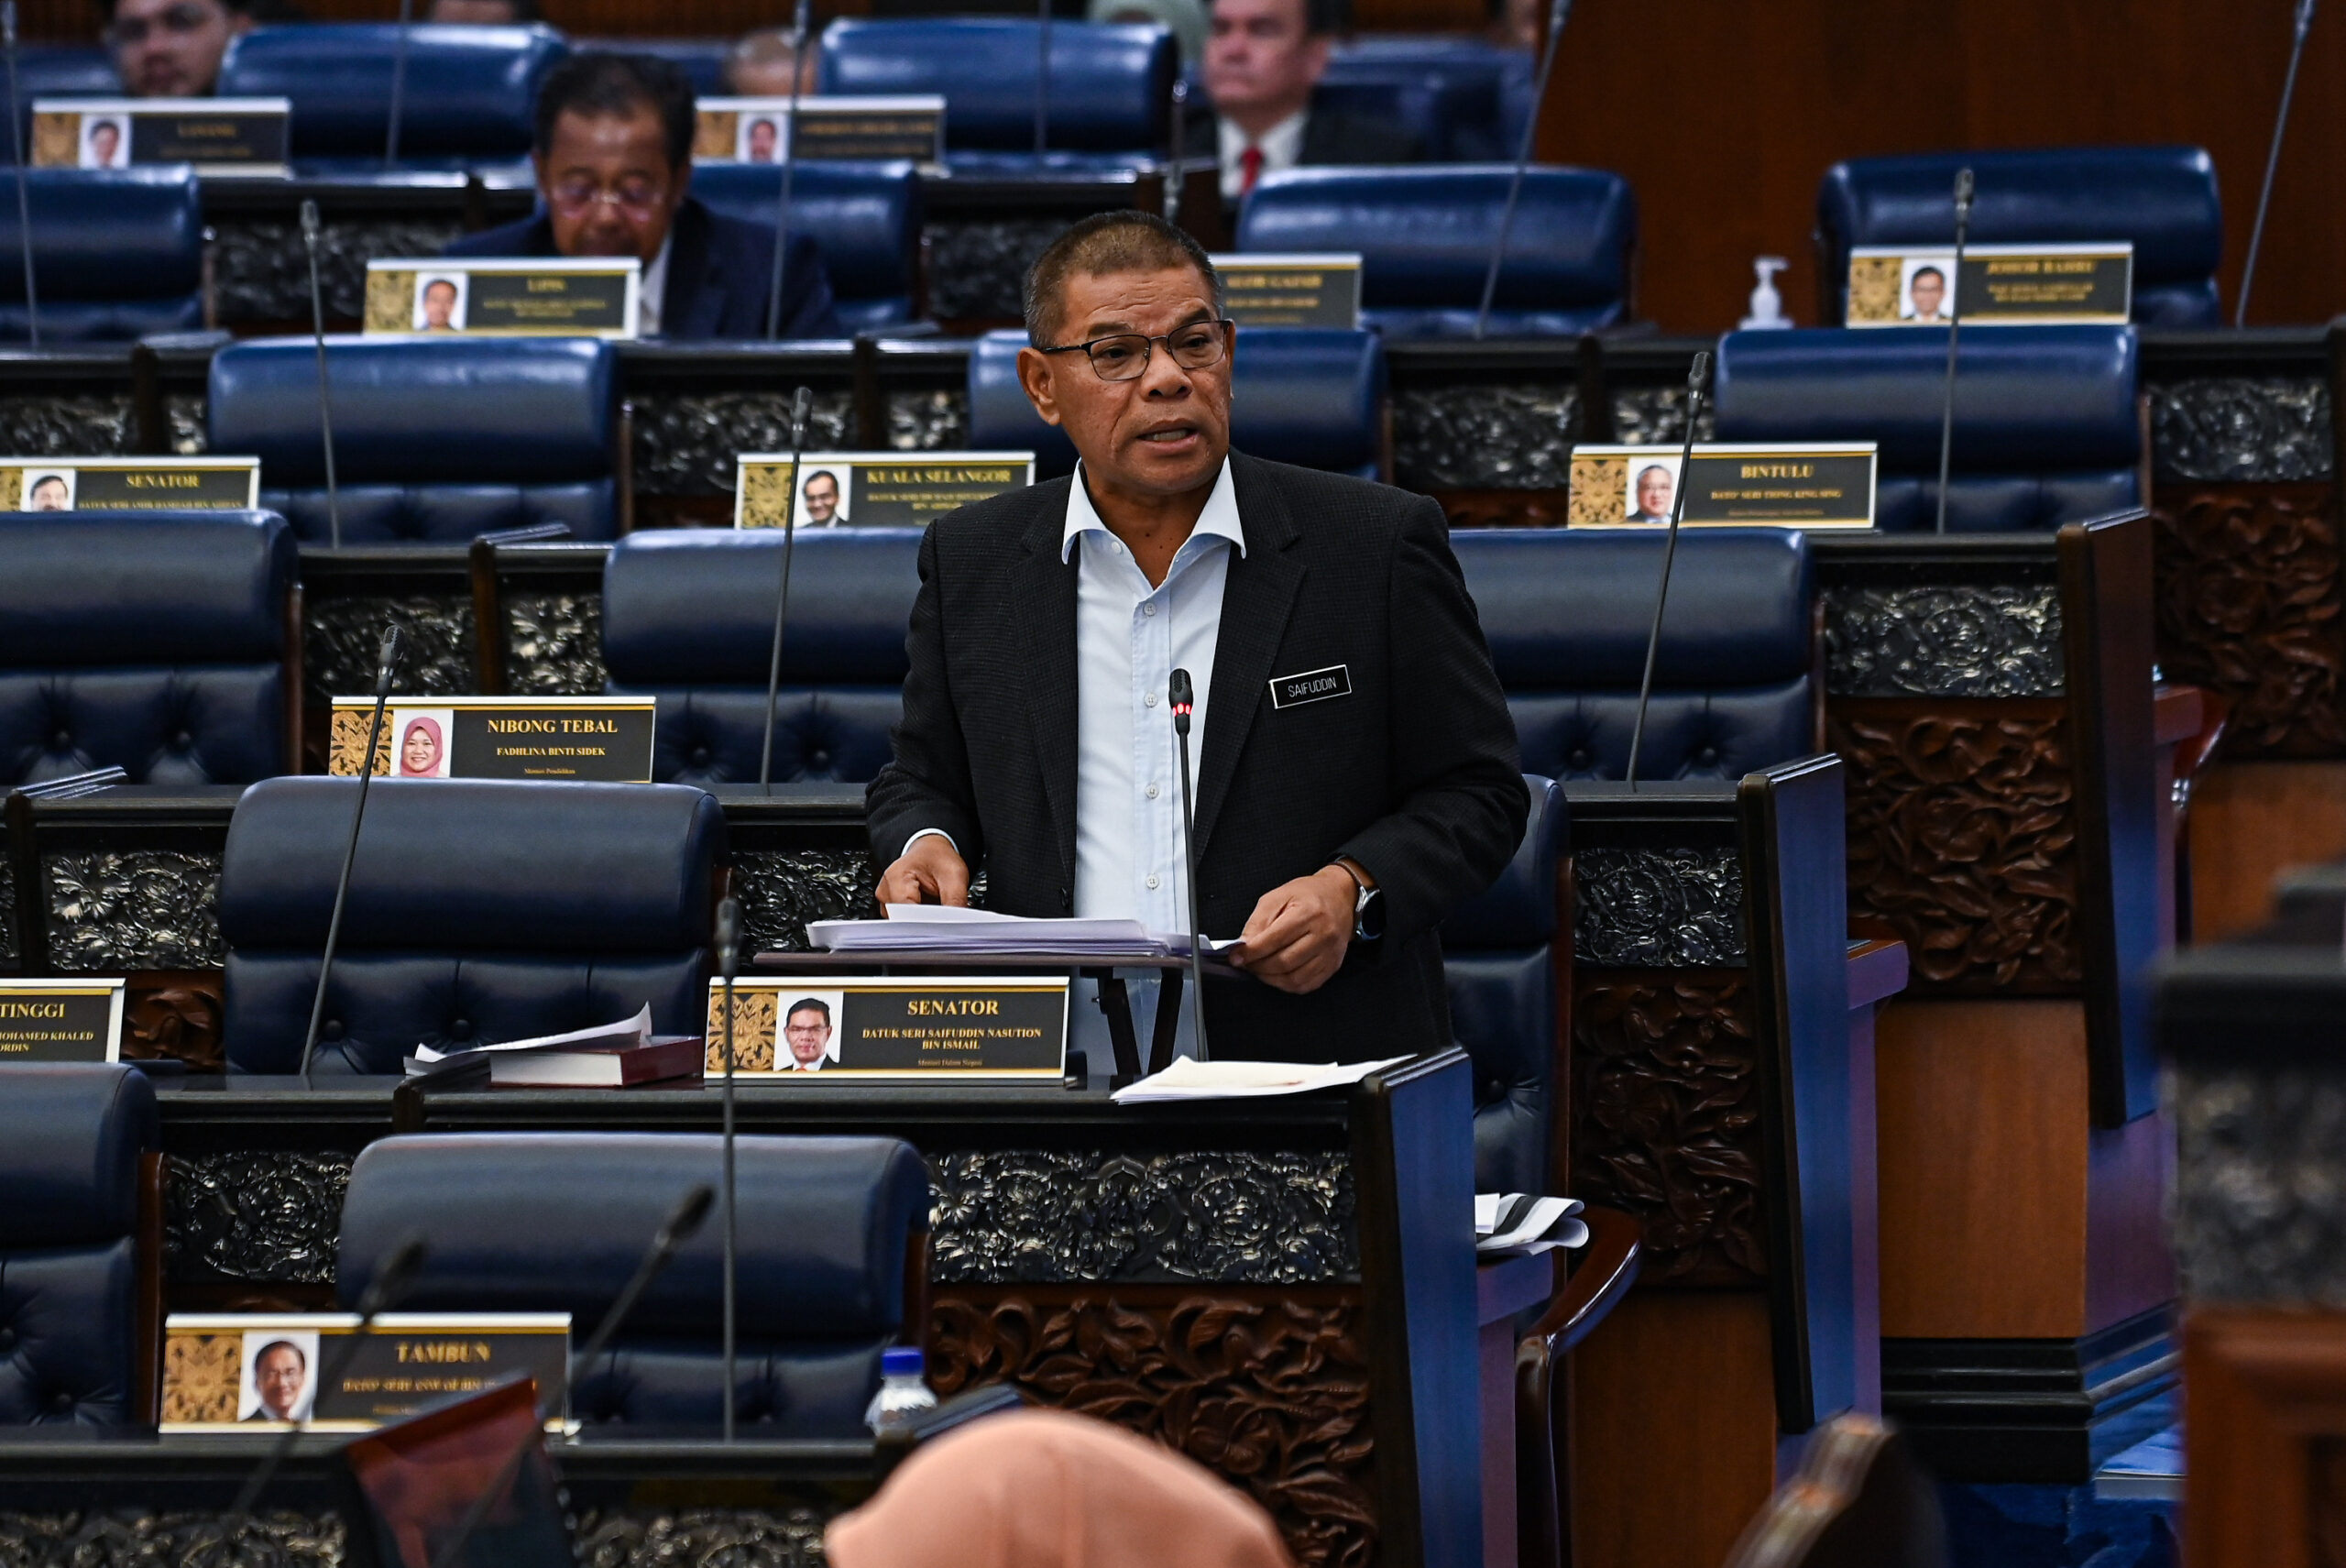 [UPDATED] You can hold me accountable: Saifuddin on overdue children’s citizenship application